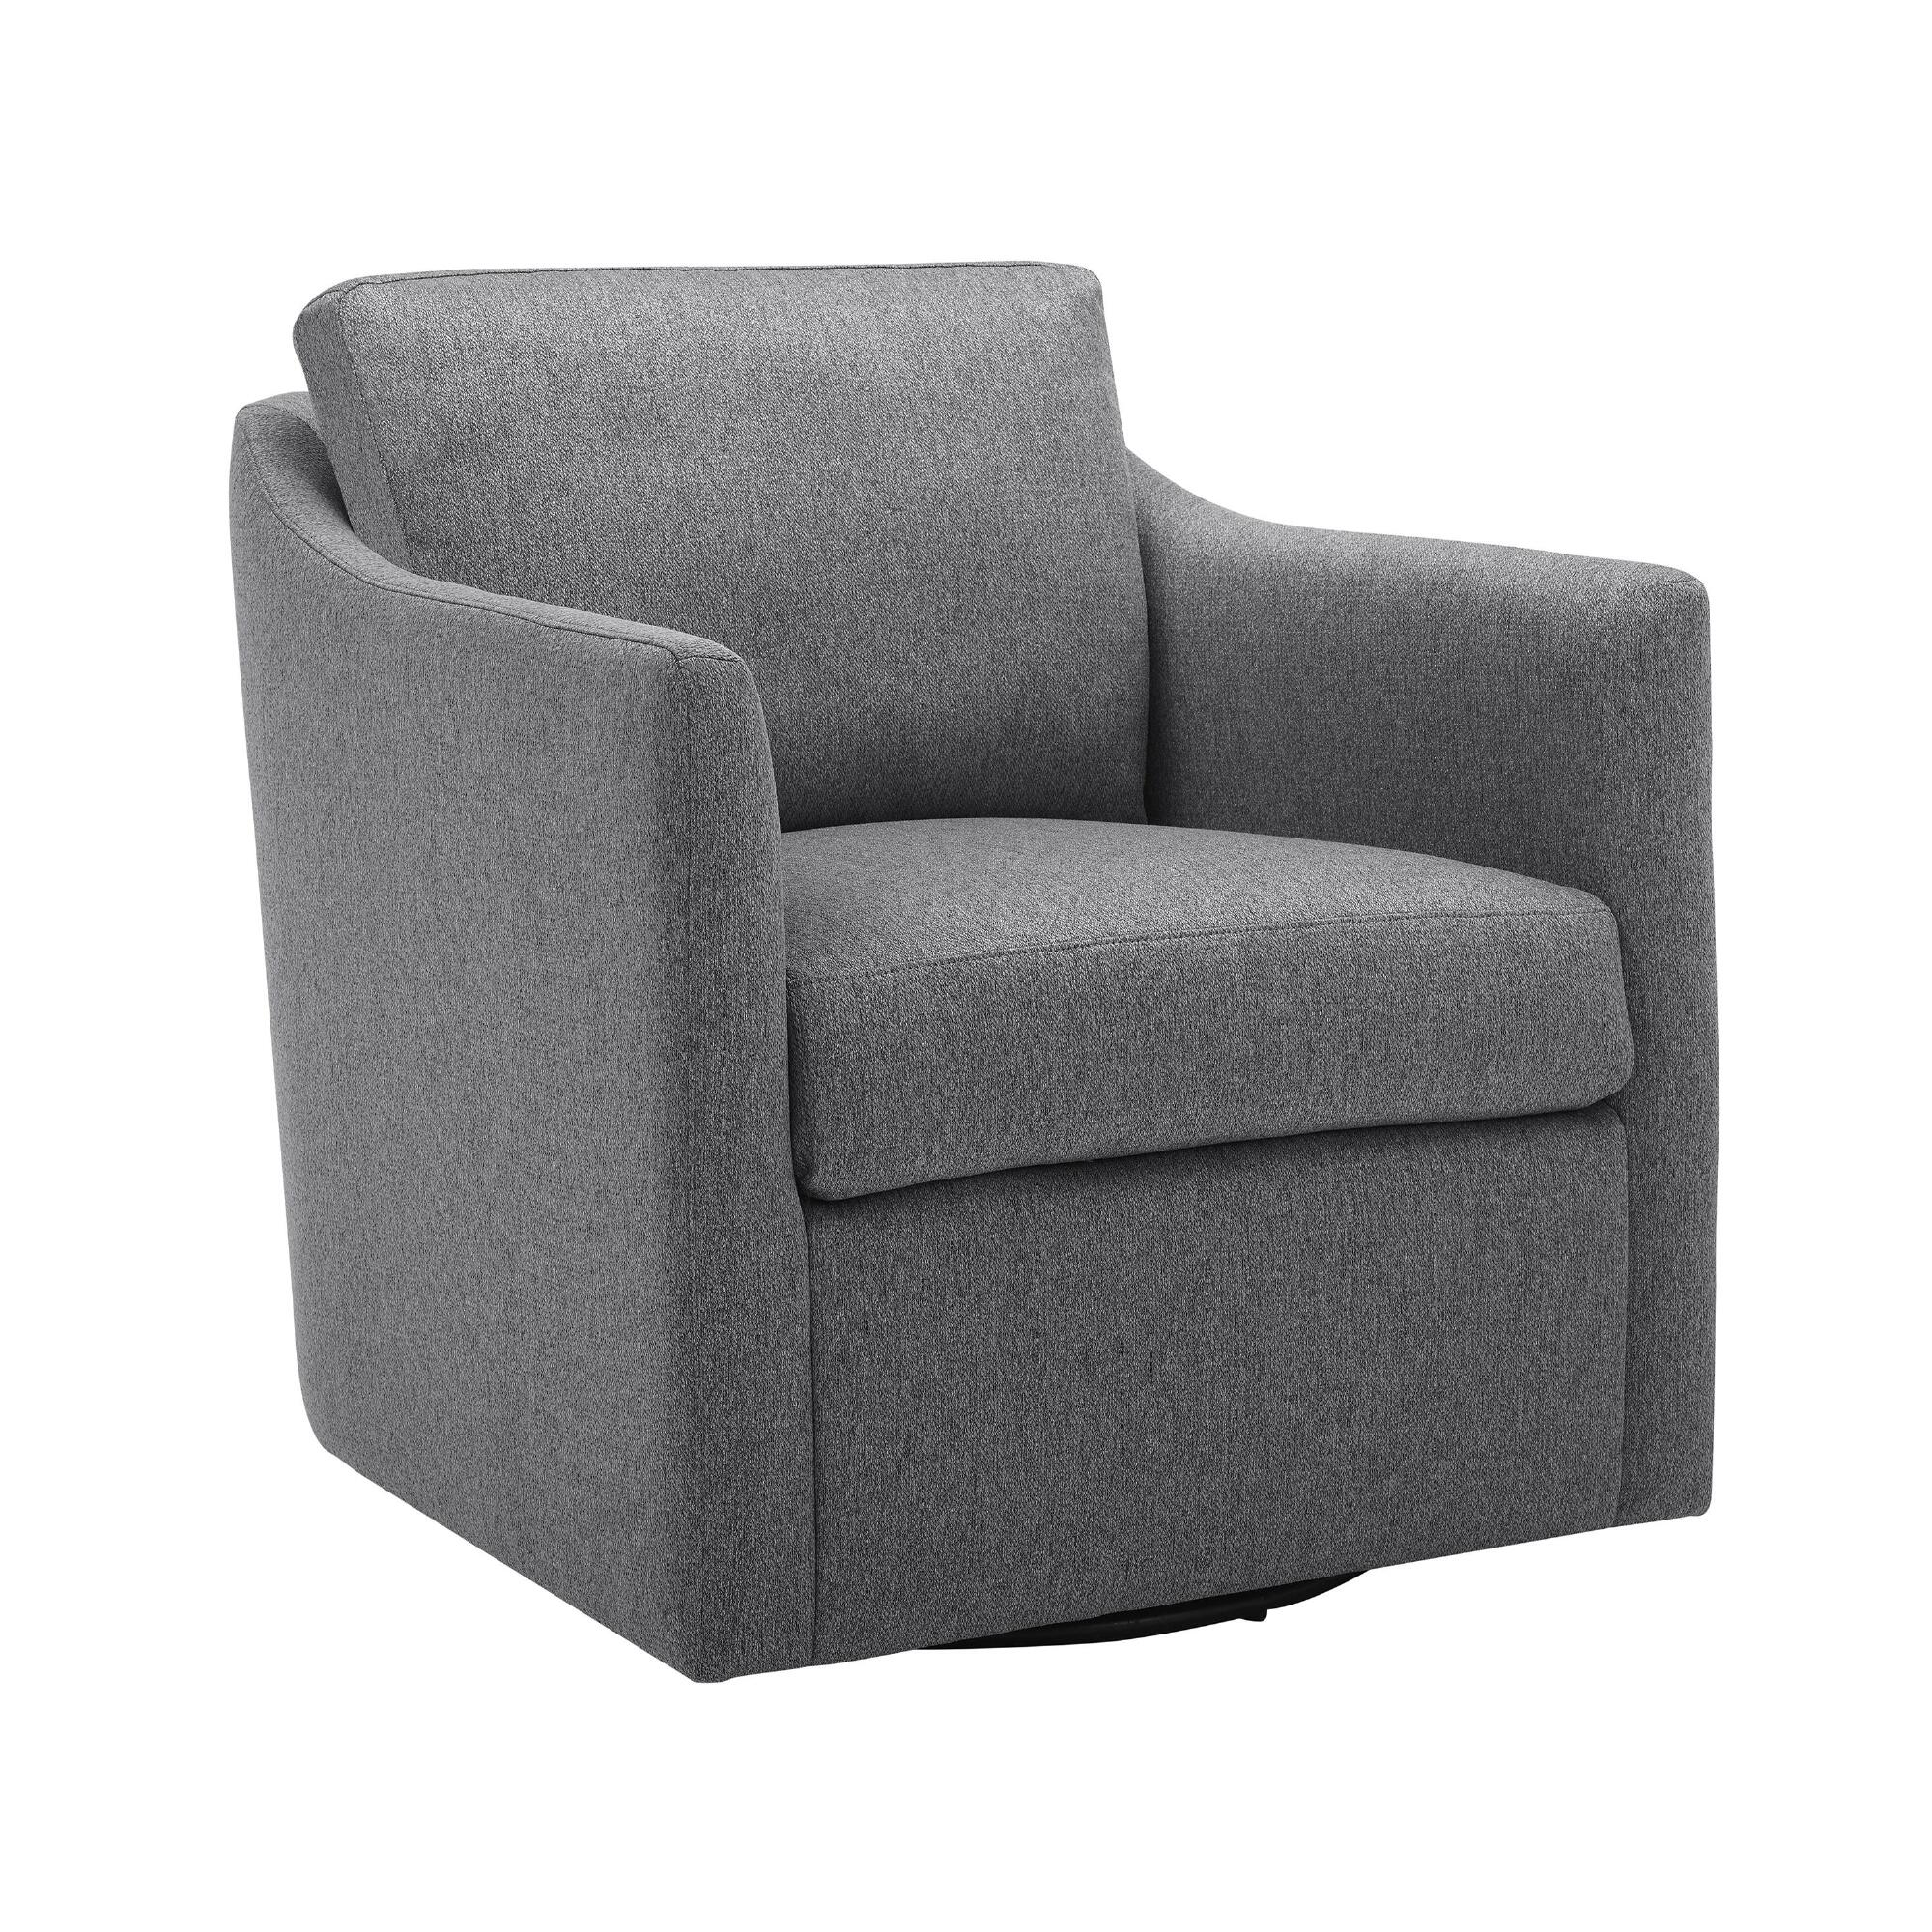 Gray Slope Arm Melvin Swivel Chair by World Market